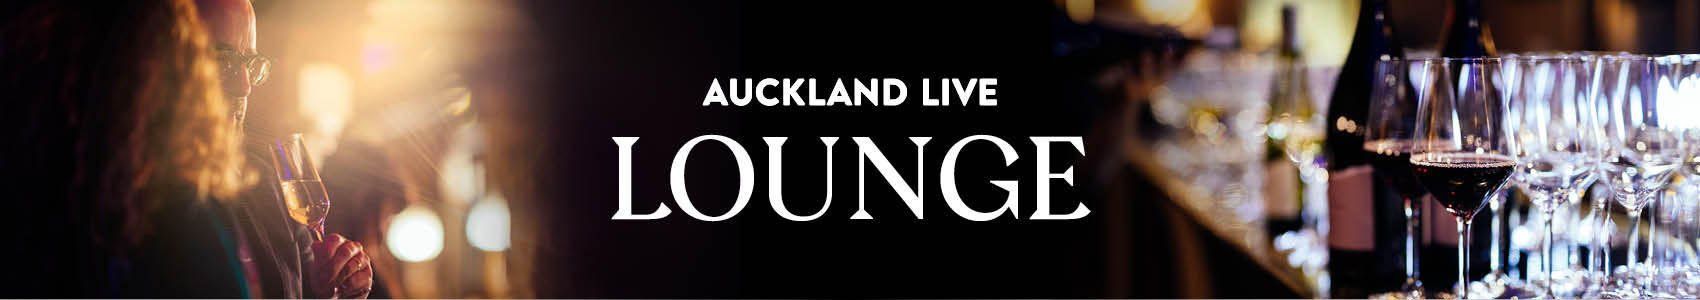 Auckland Live Lounge